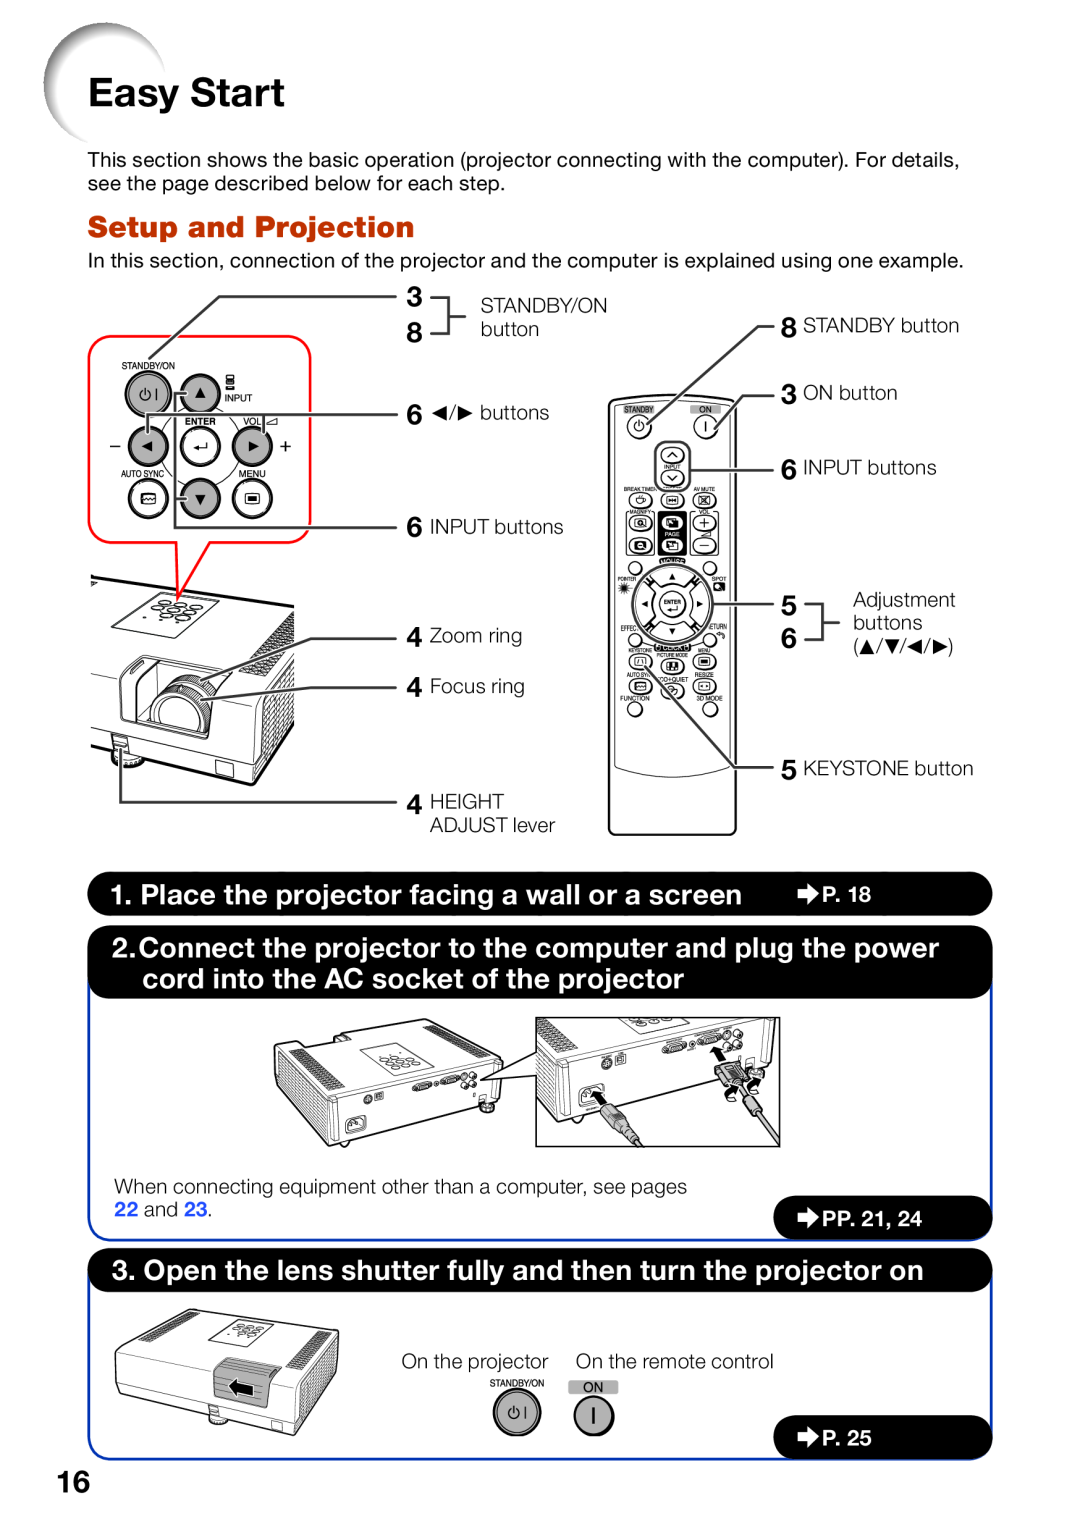 Sharp XR-55X, XR-50S appendix Easy Start, Setup and Projection, Place the projector facing a wall or a screen, PP. 21 